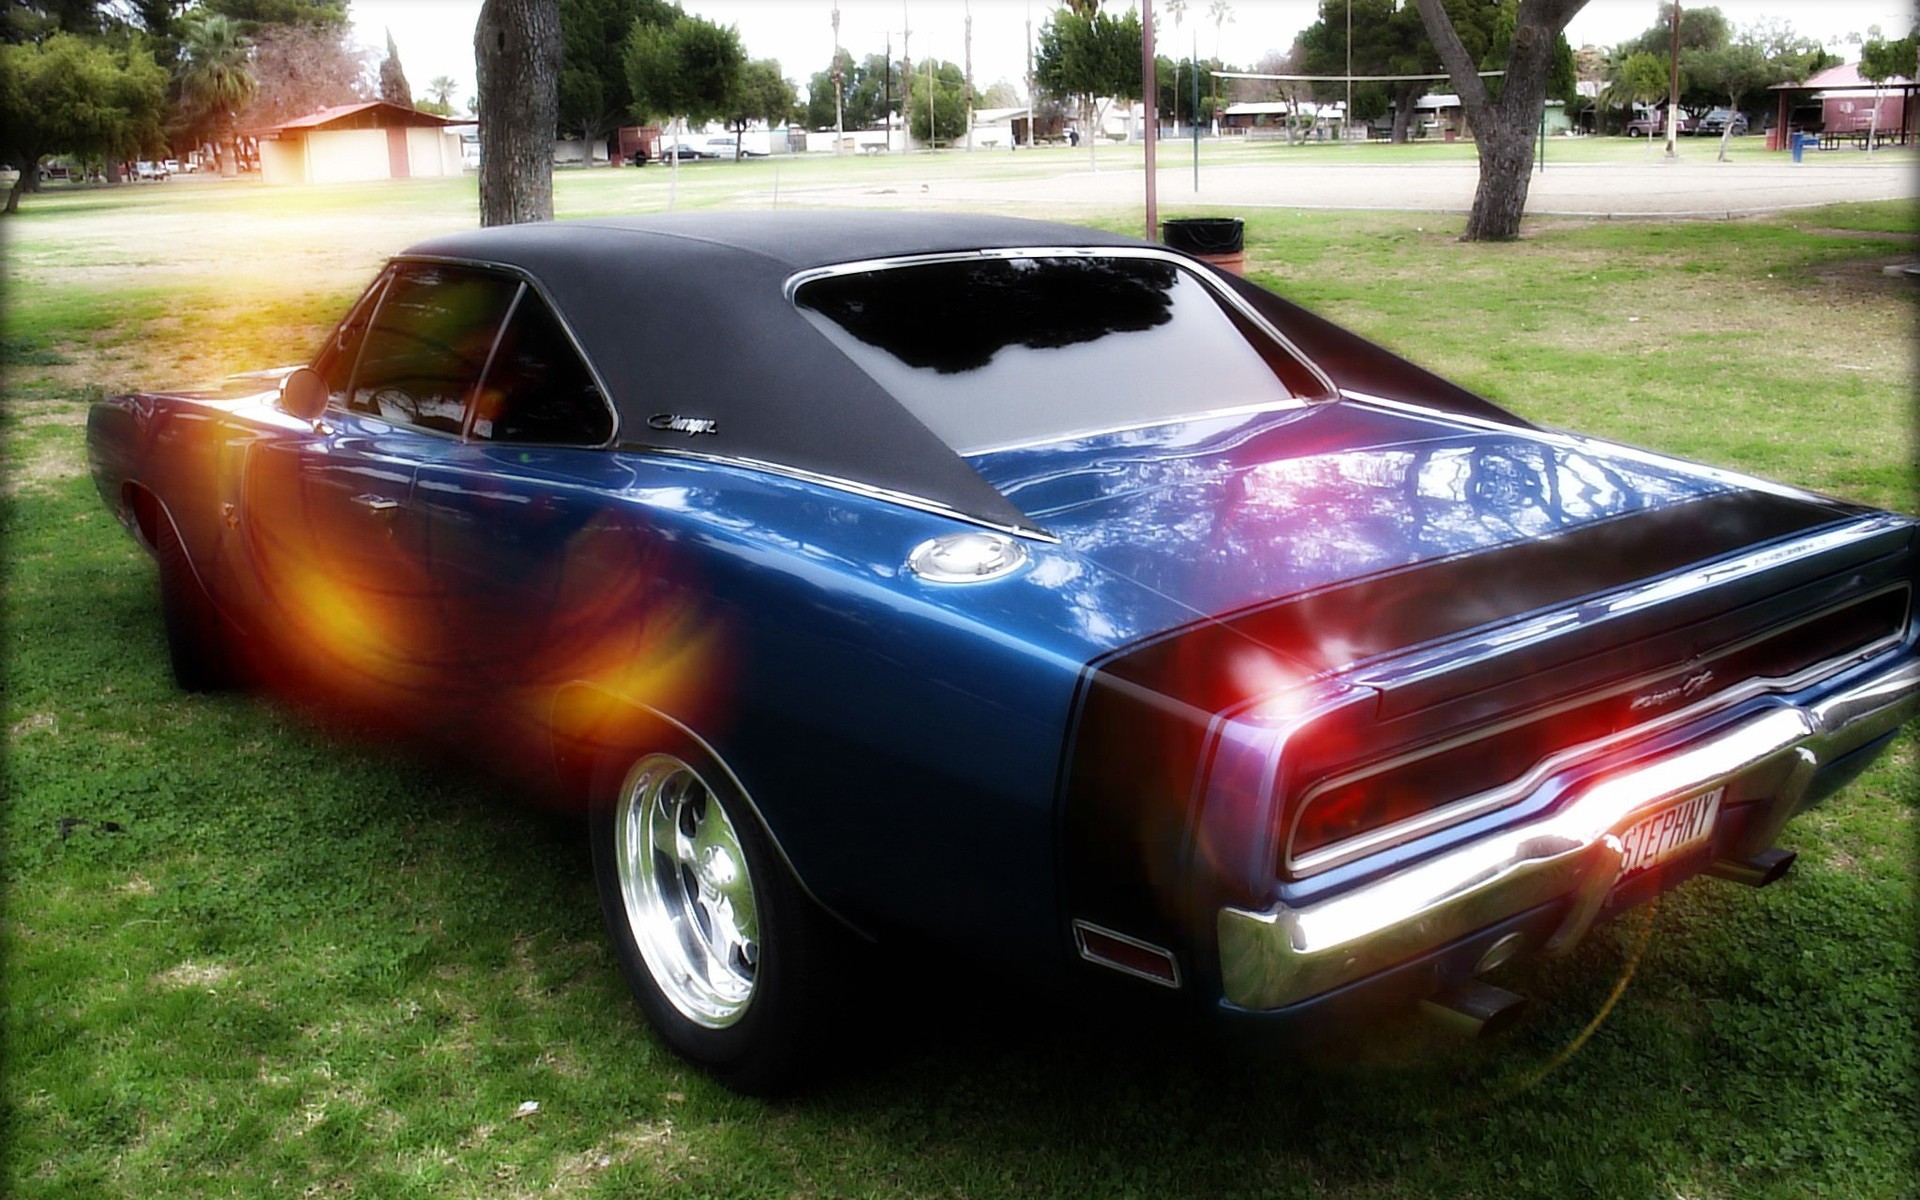 General 1920x1200 car Dodge Charger Dodge vehicle blue cars muscle cars American cars